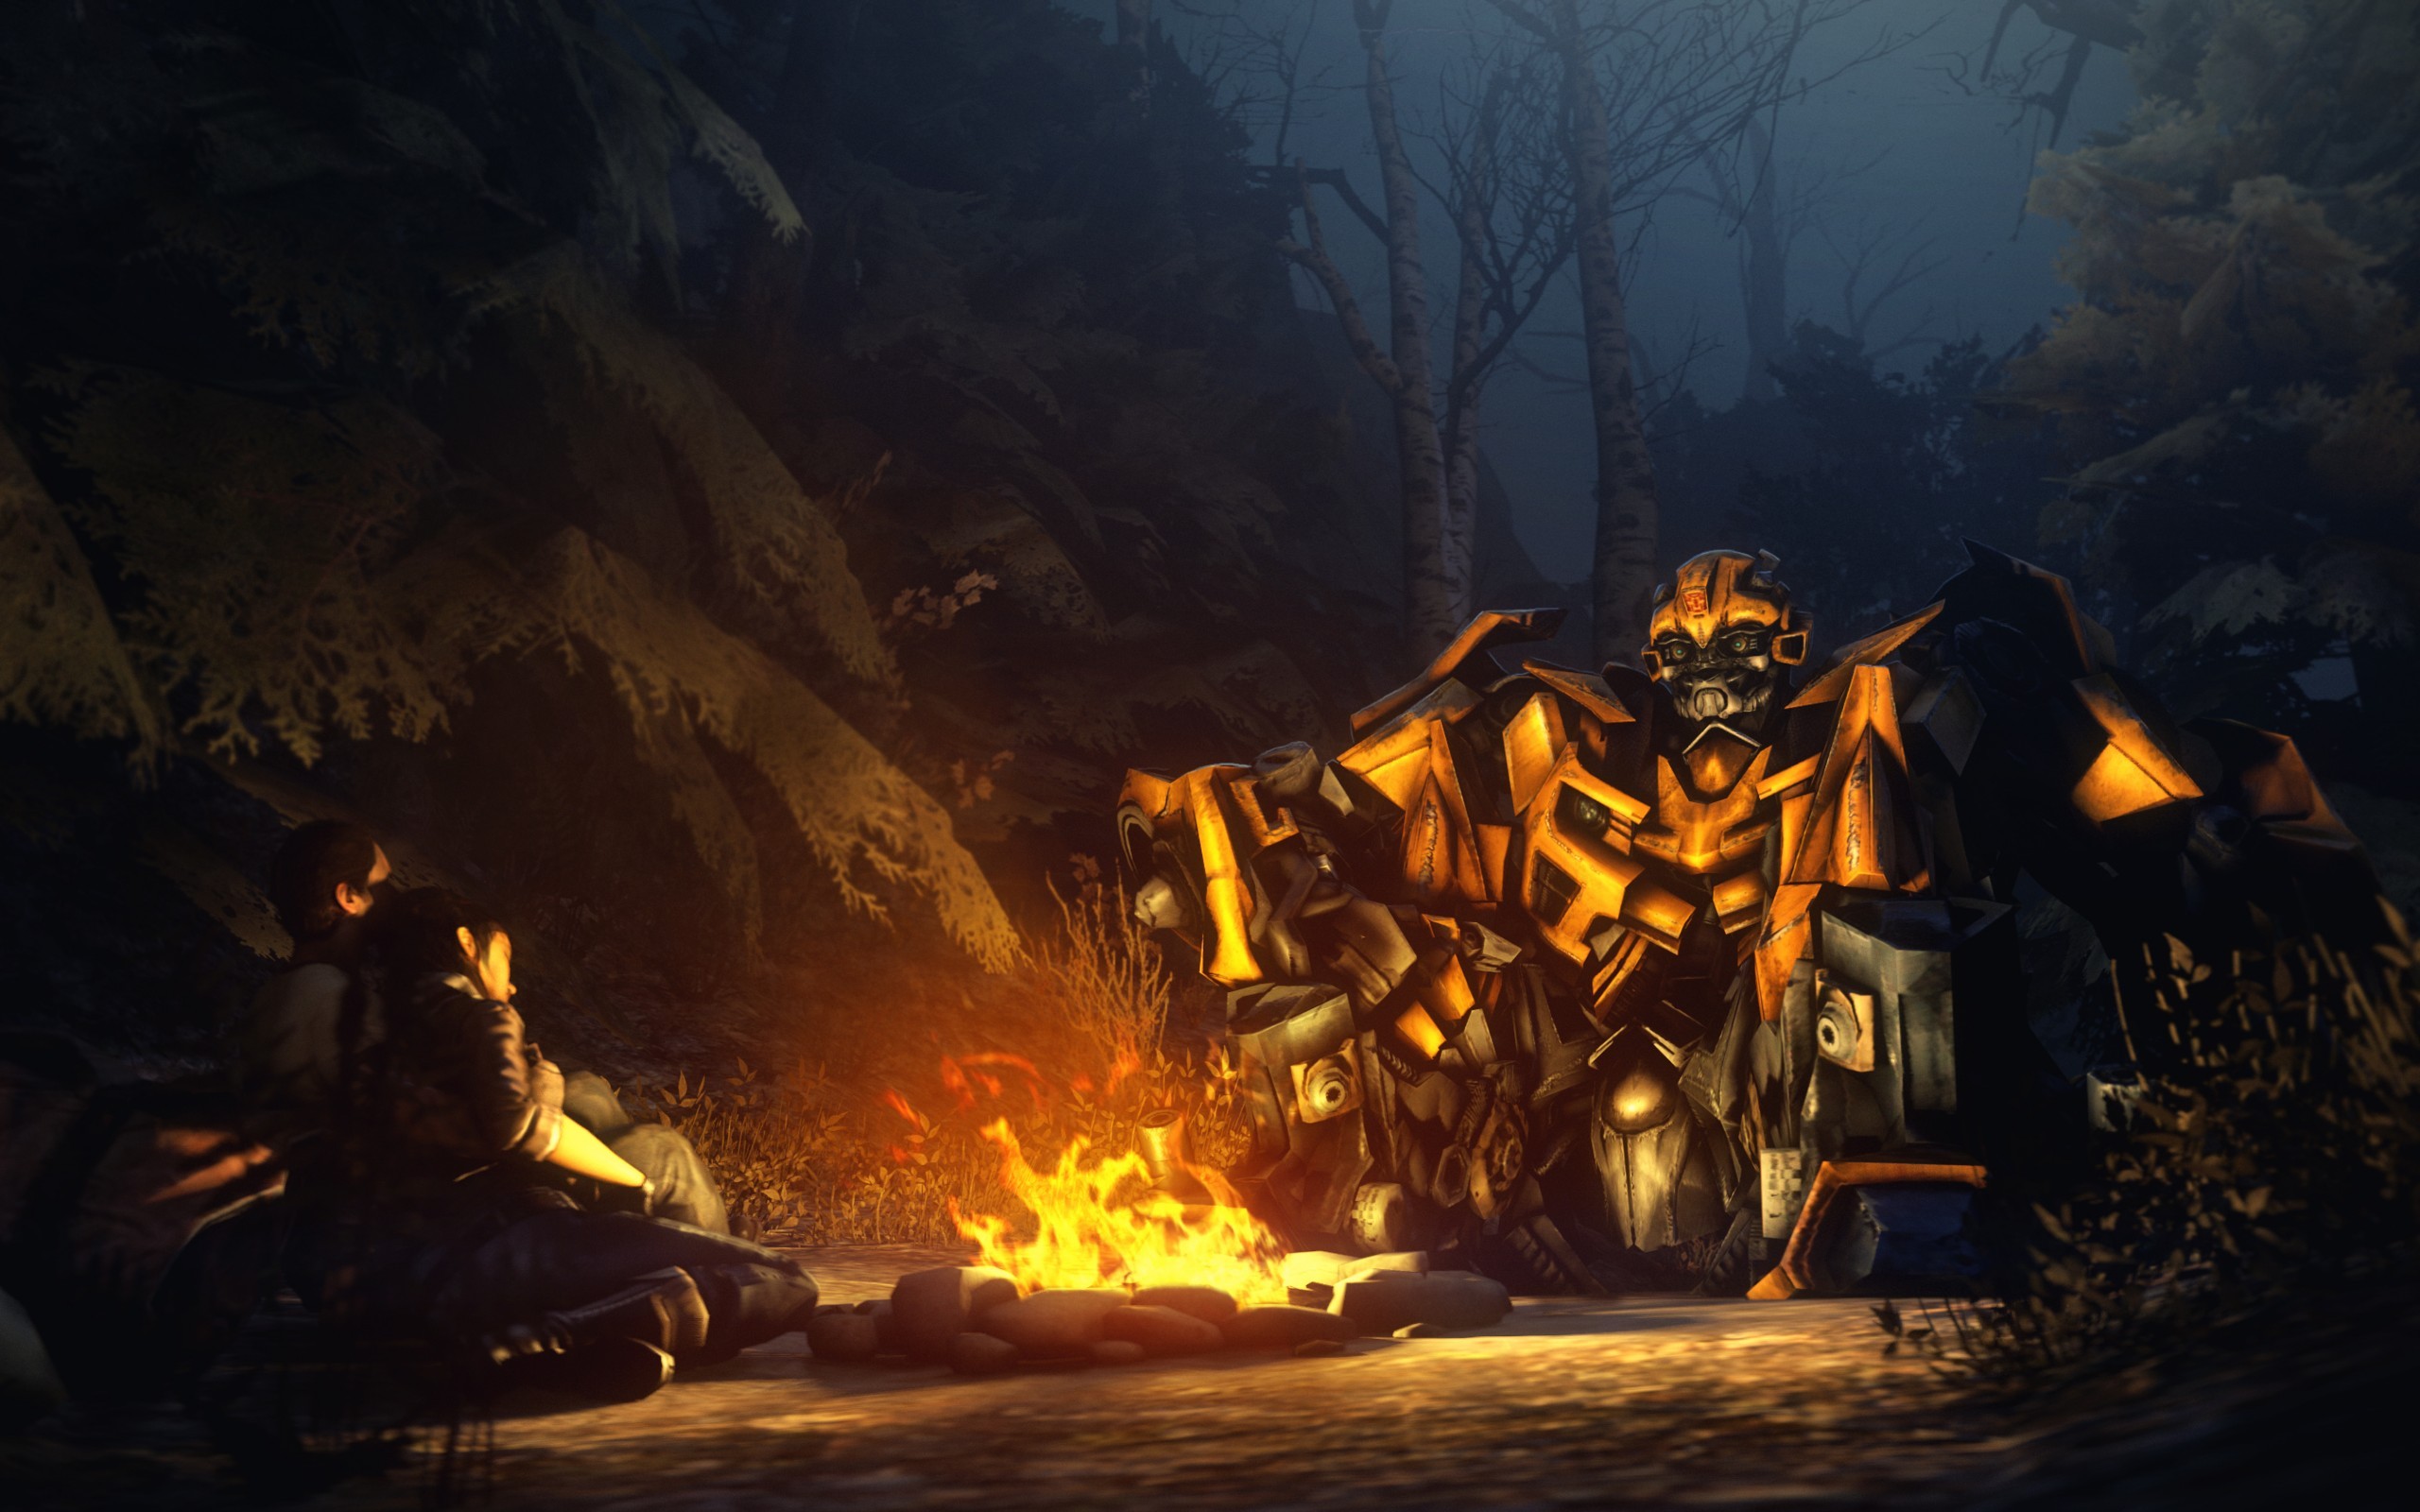 General 2560x1600 Transformers Bumblebee (transformers) robot science fiction artwork campfire movies movie characters